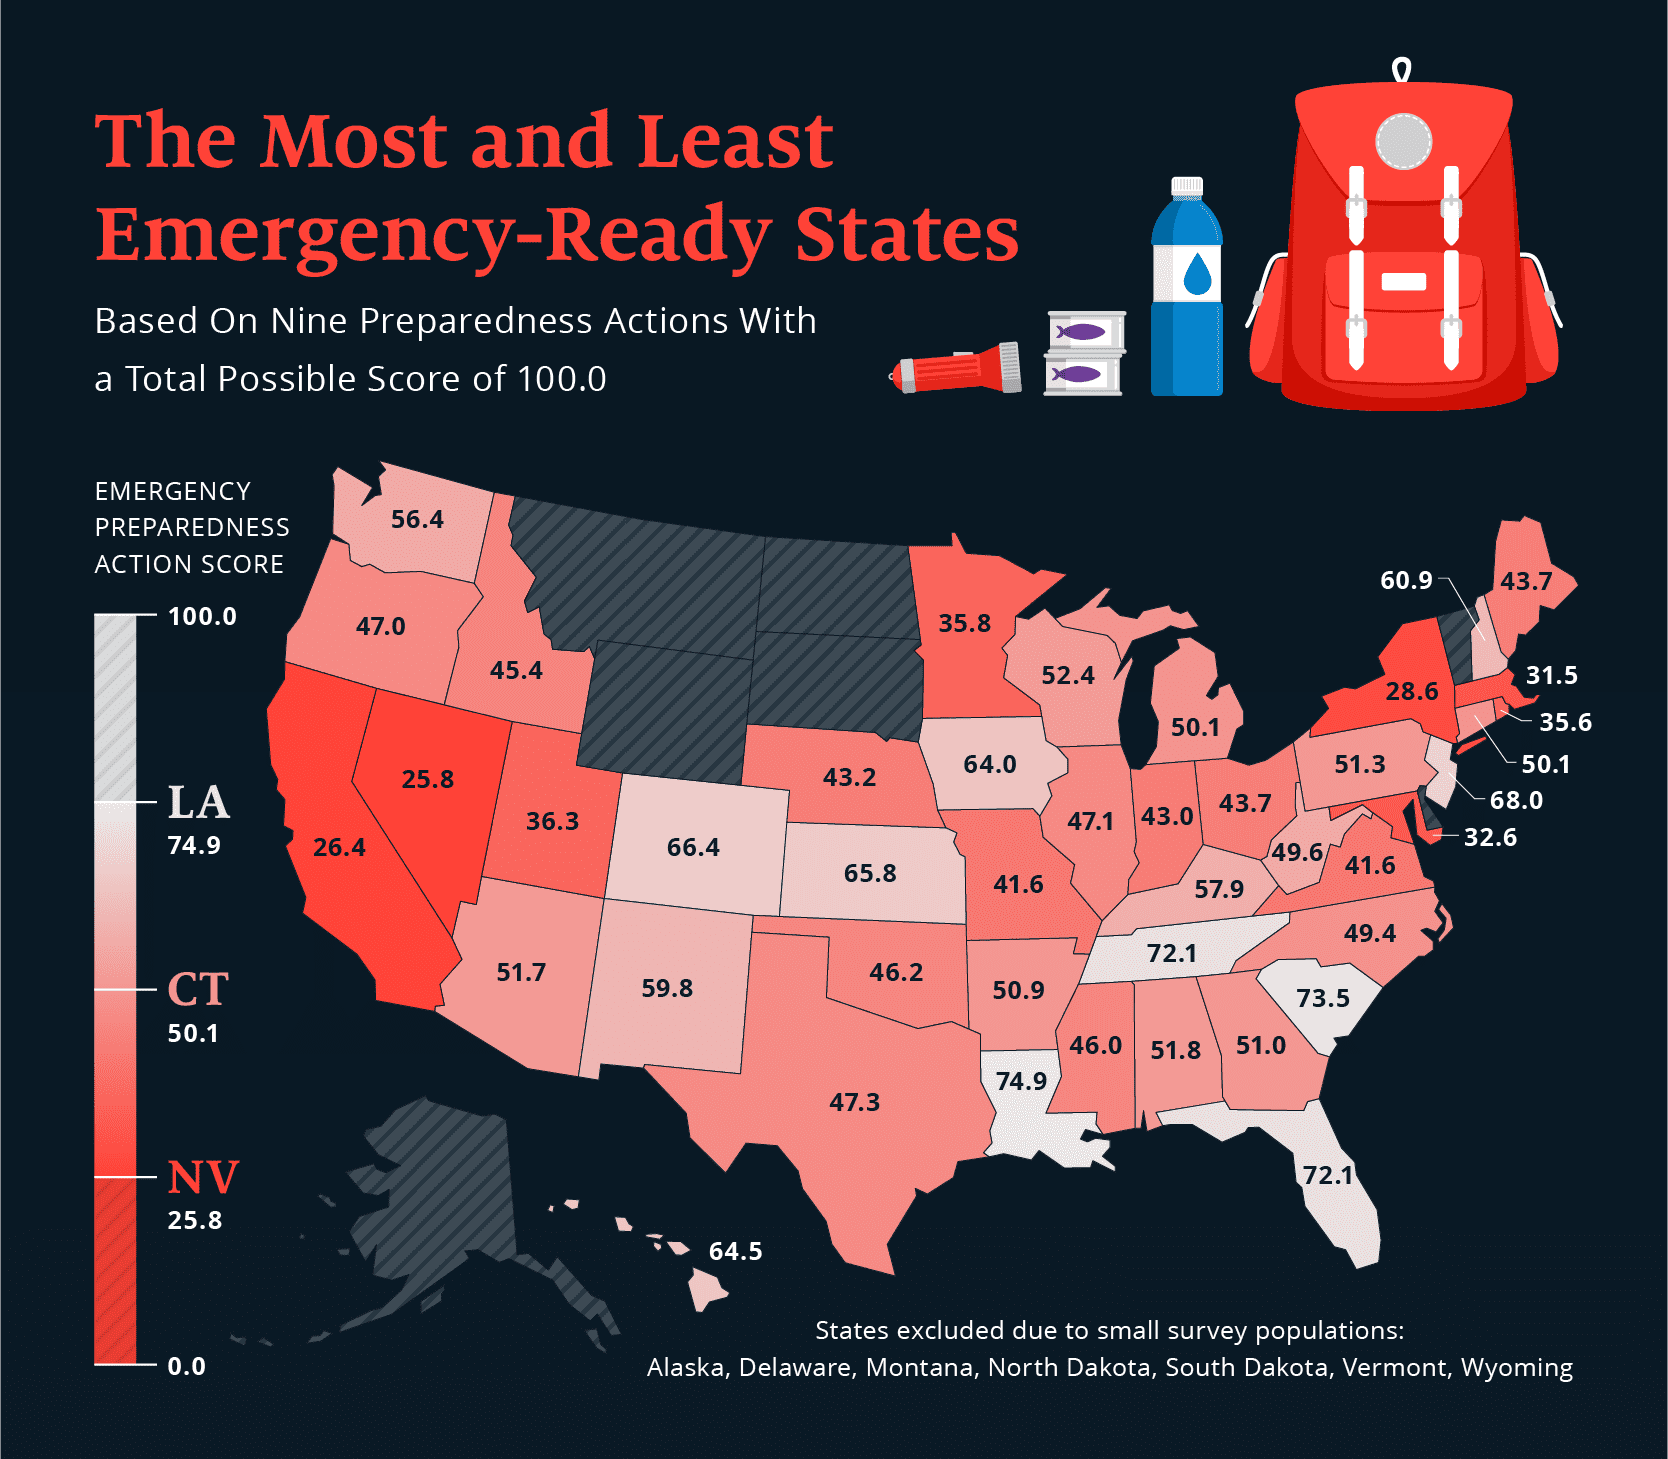 A U.S. map showing the most and least emergency-prepared states.